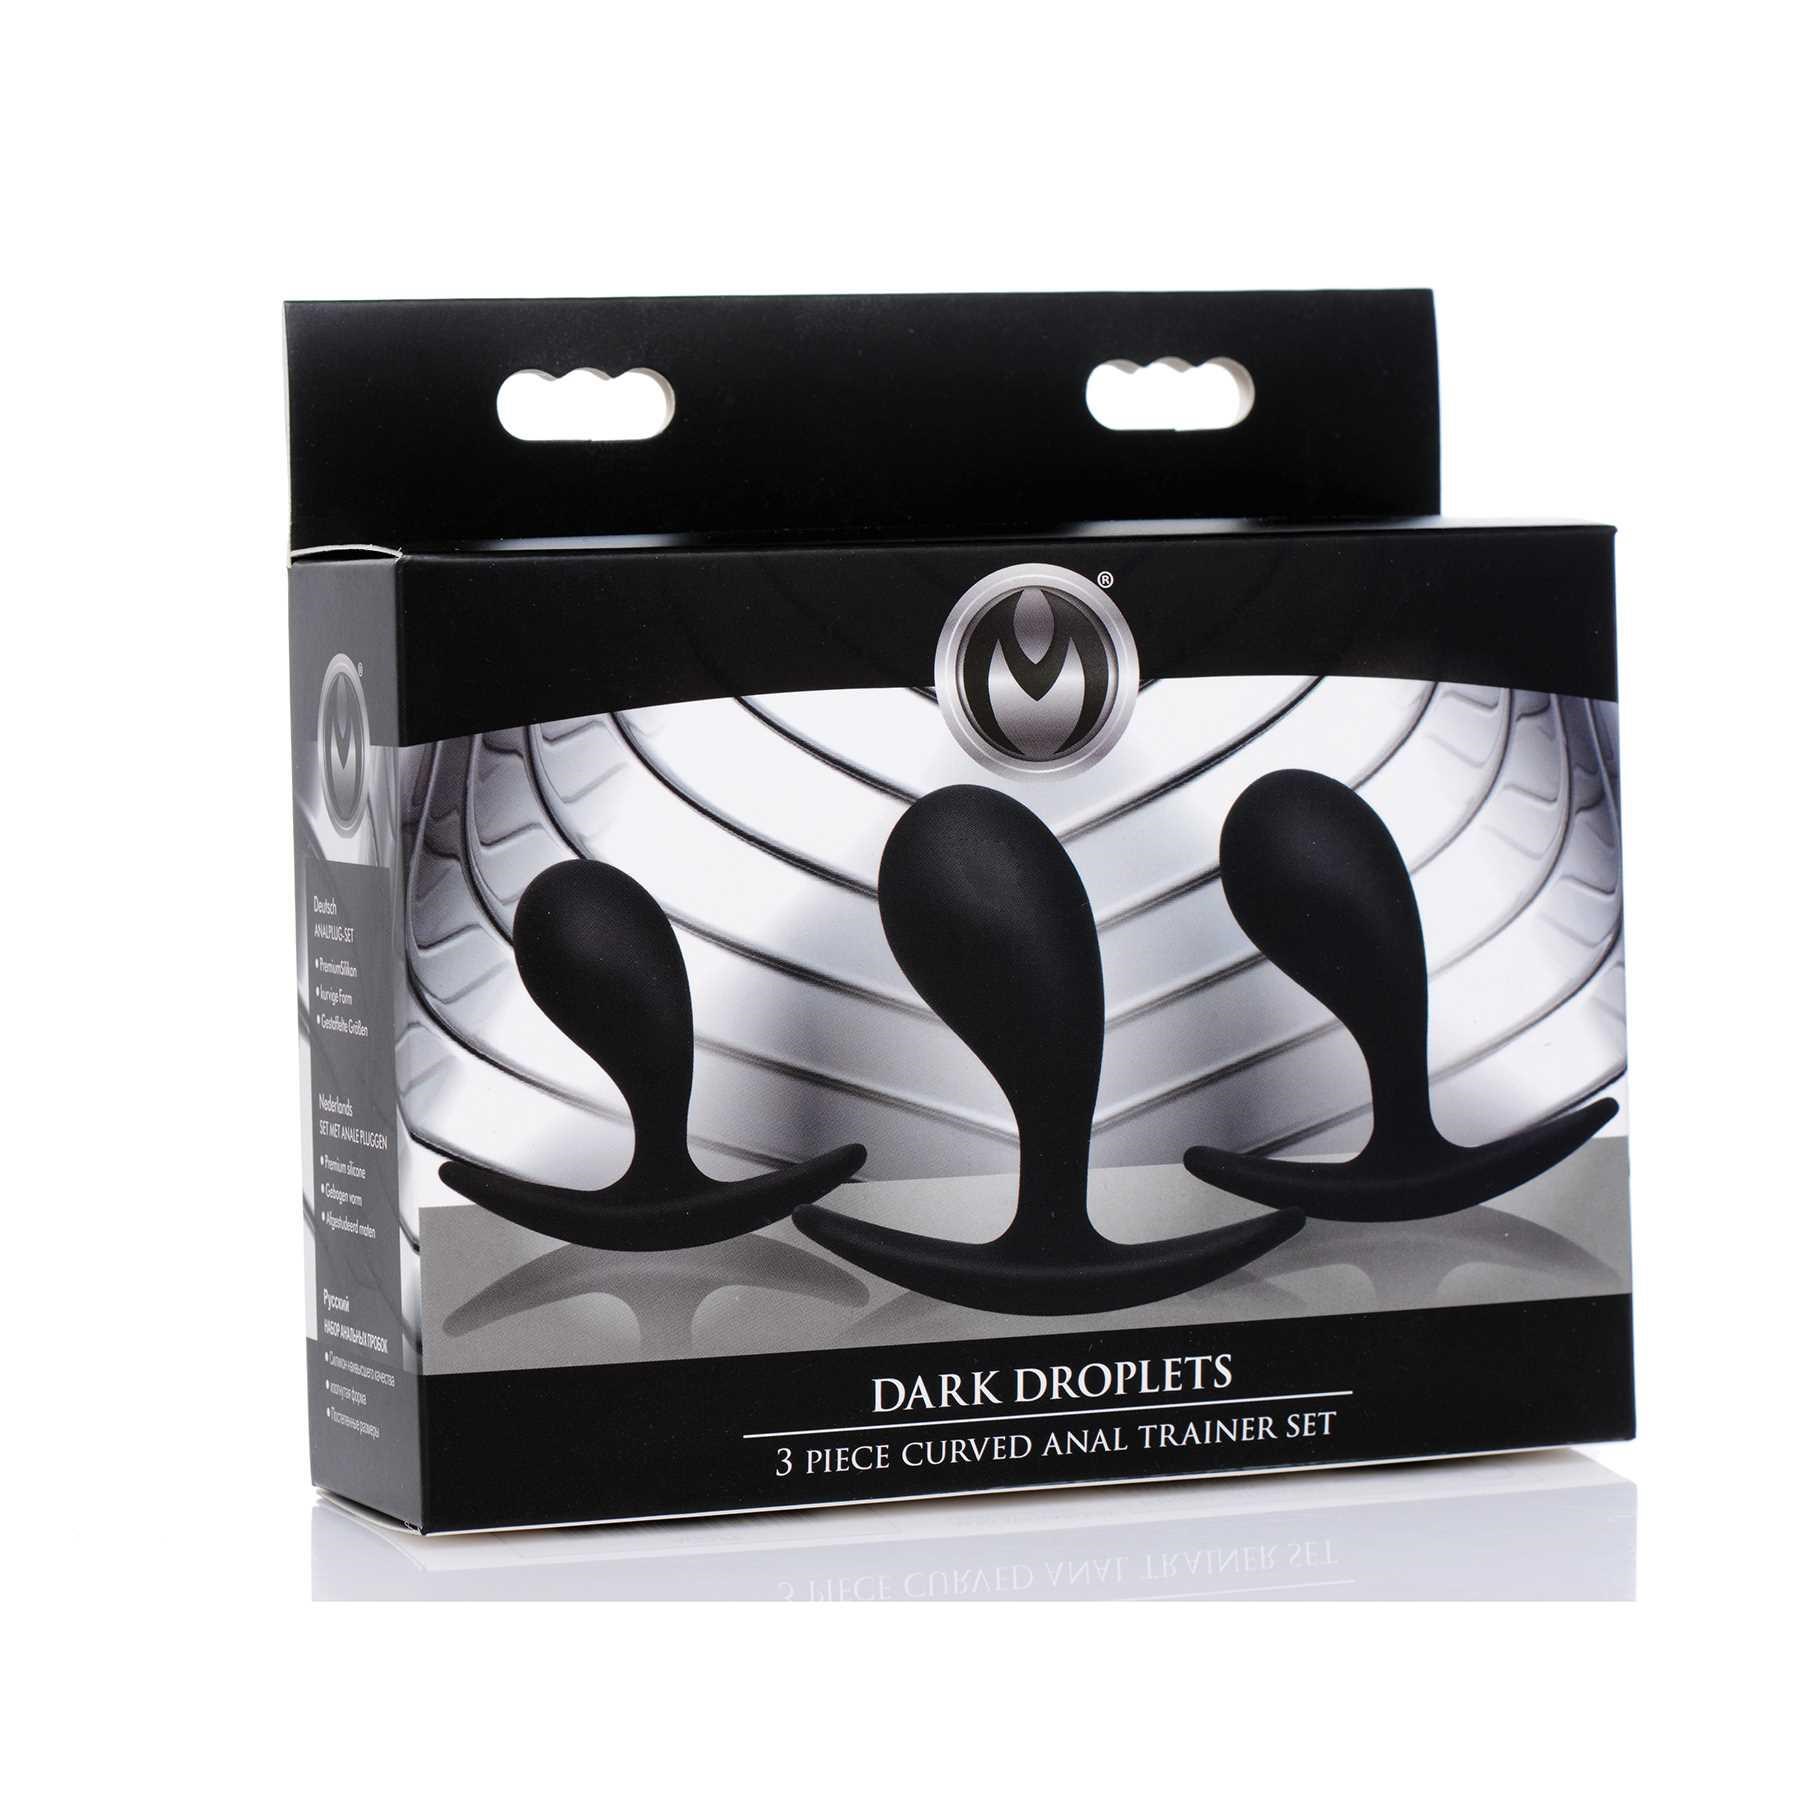 Dark Droplets 3 Piece Anal Trainer box packaging